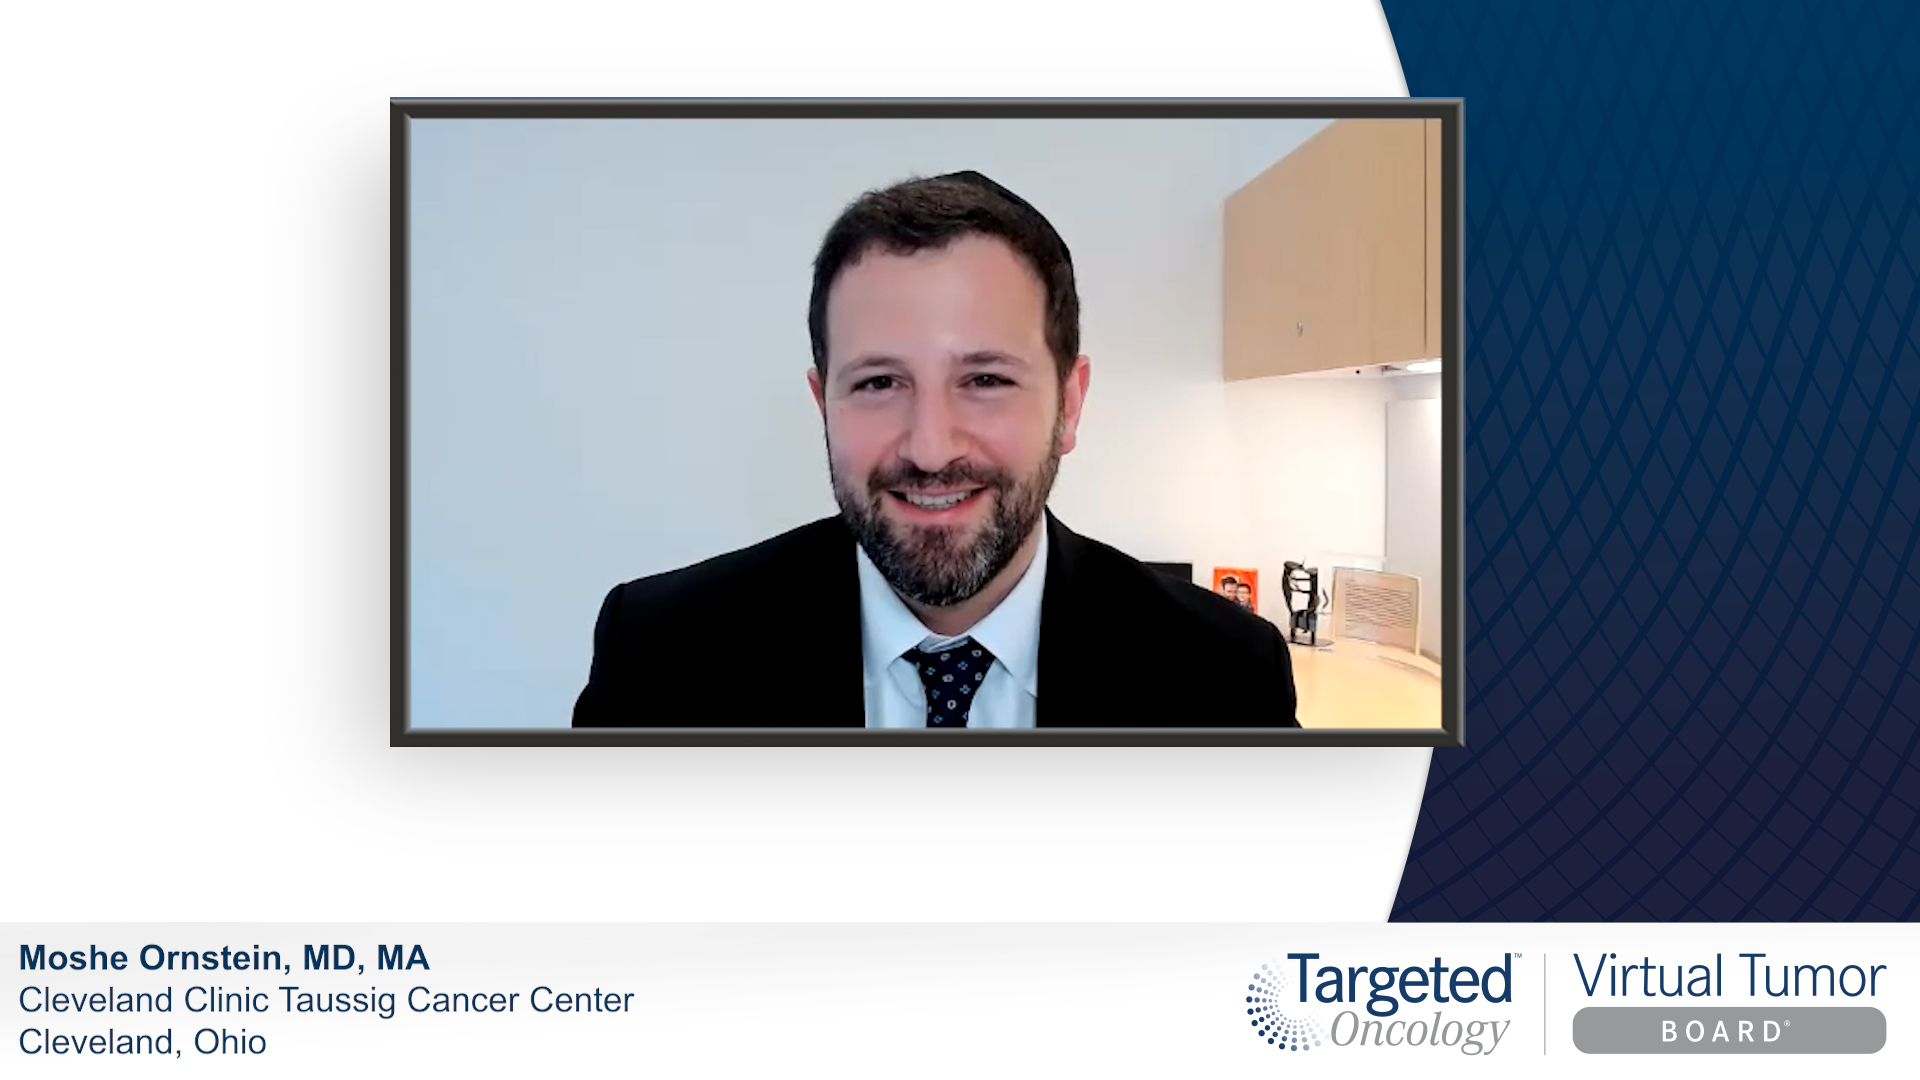 Selecting a Treatment Regimen for Favorable Risk Advanced Clear Cell RCC